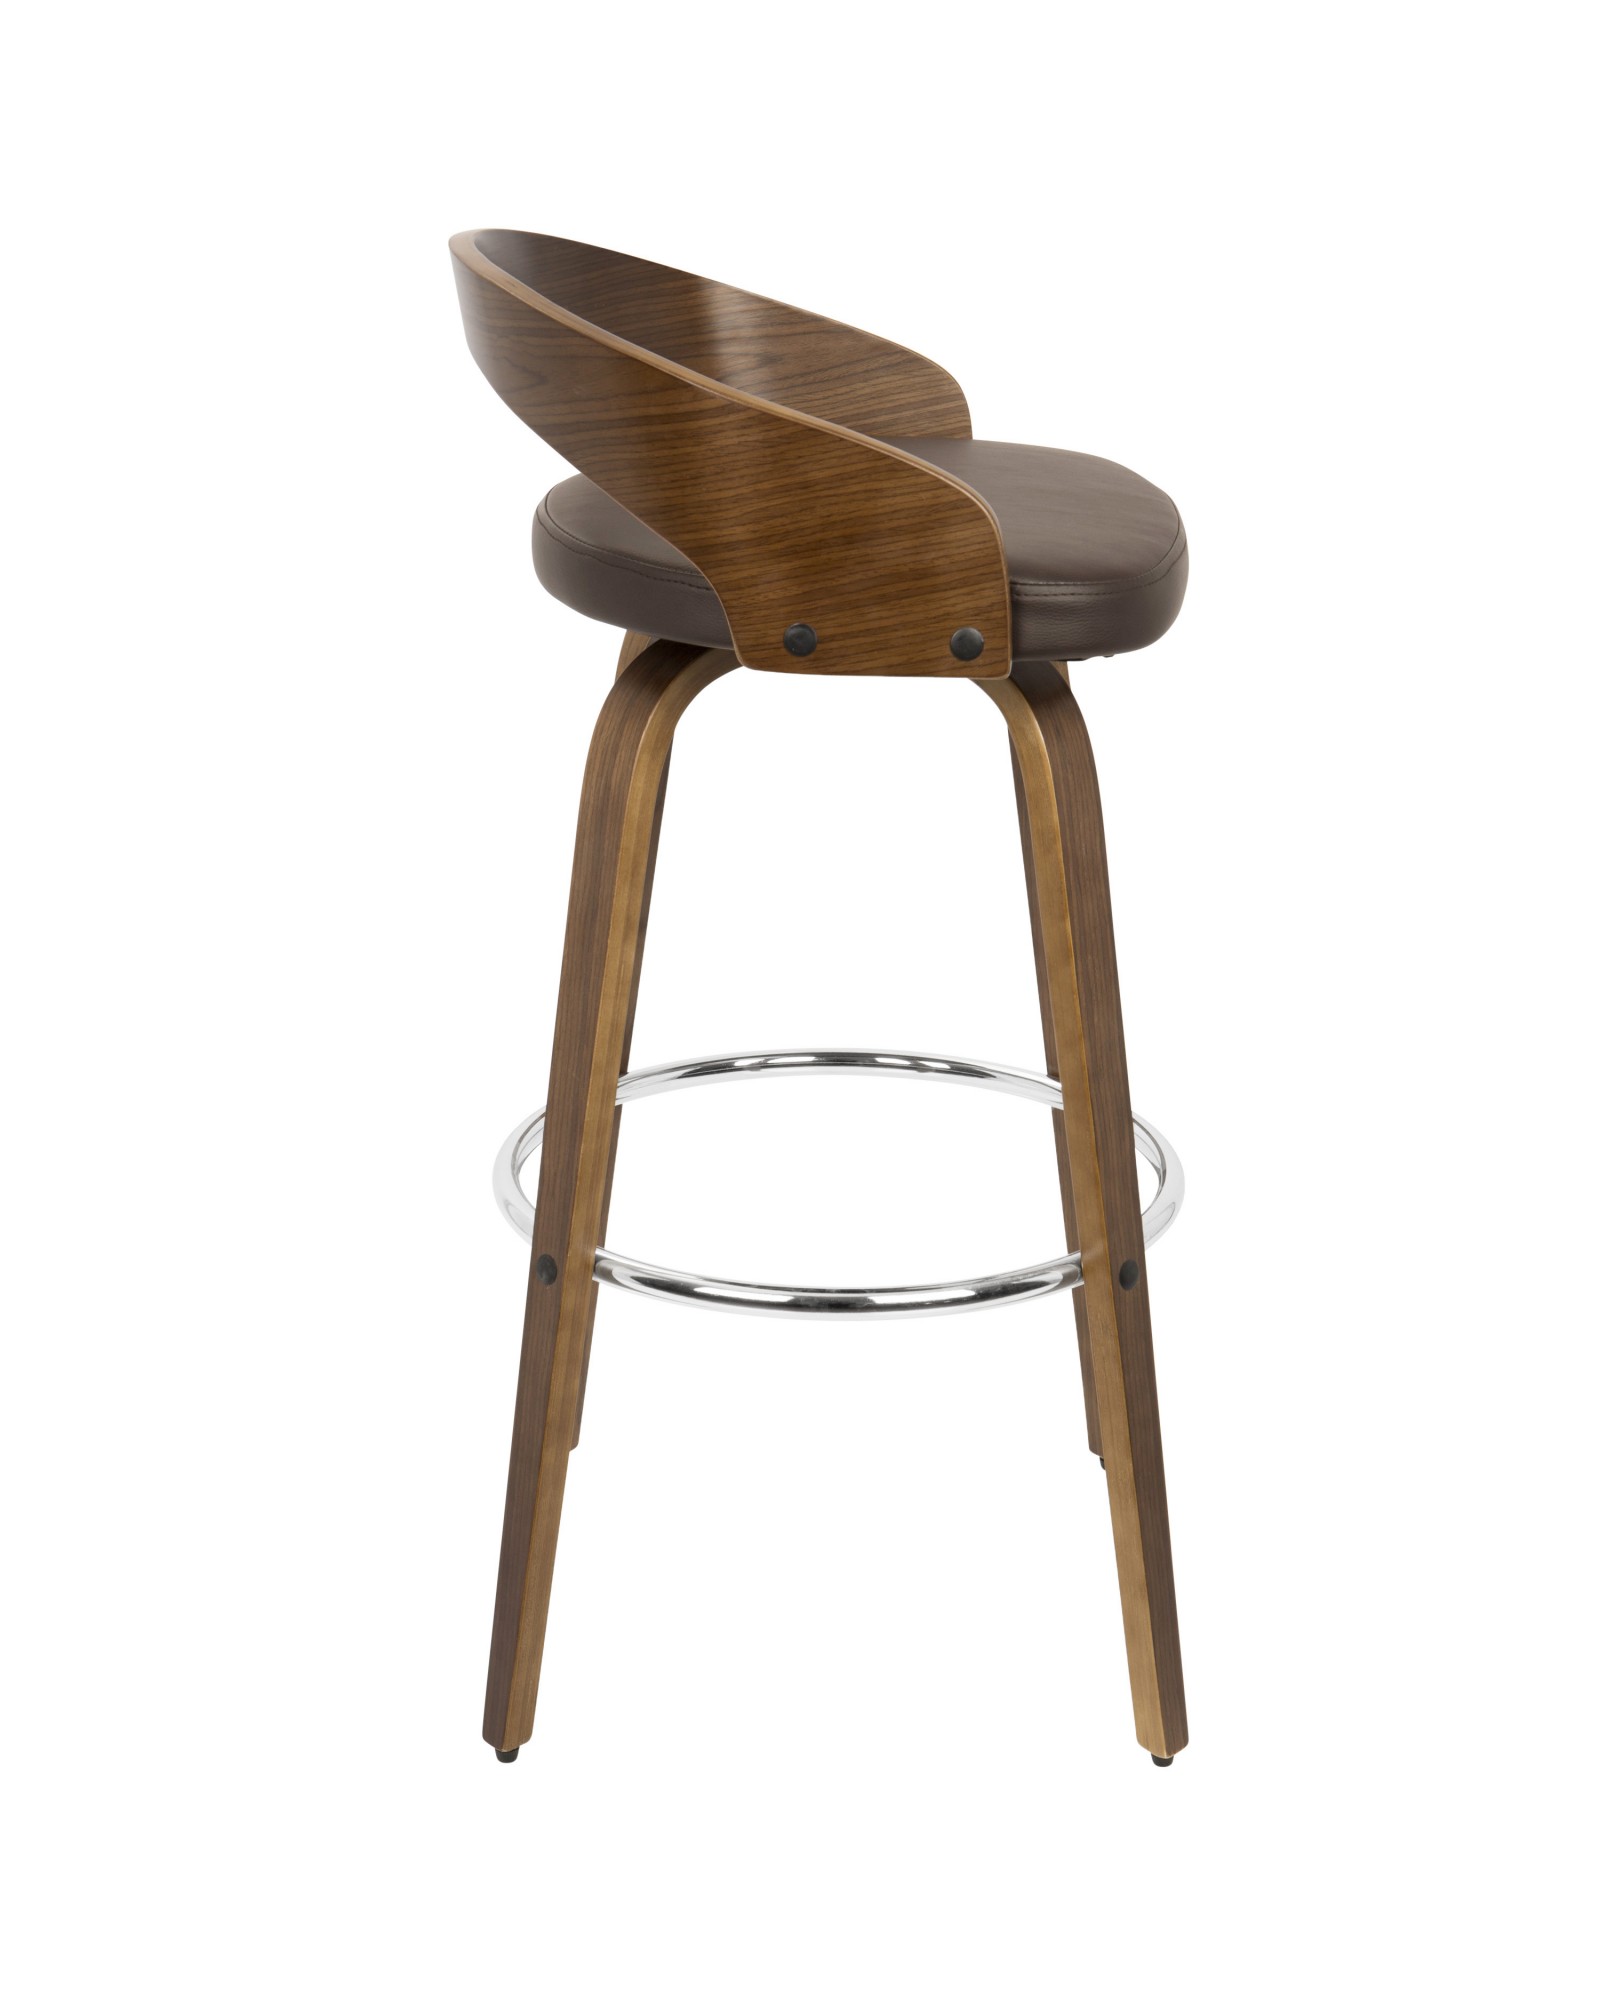 Grotto Mid-Century Modern Barstool with Swivel in Walnut with Brown Faux Leather